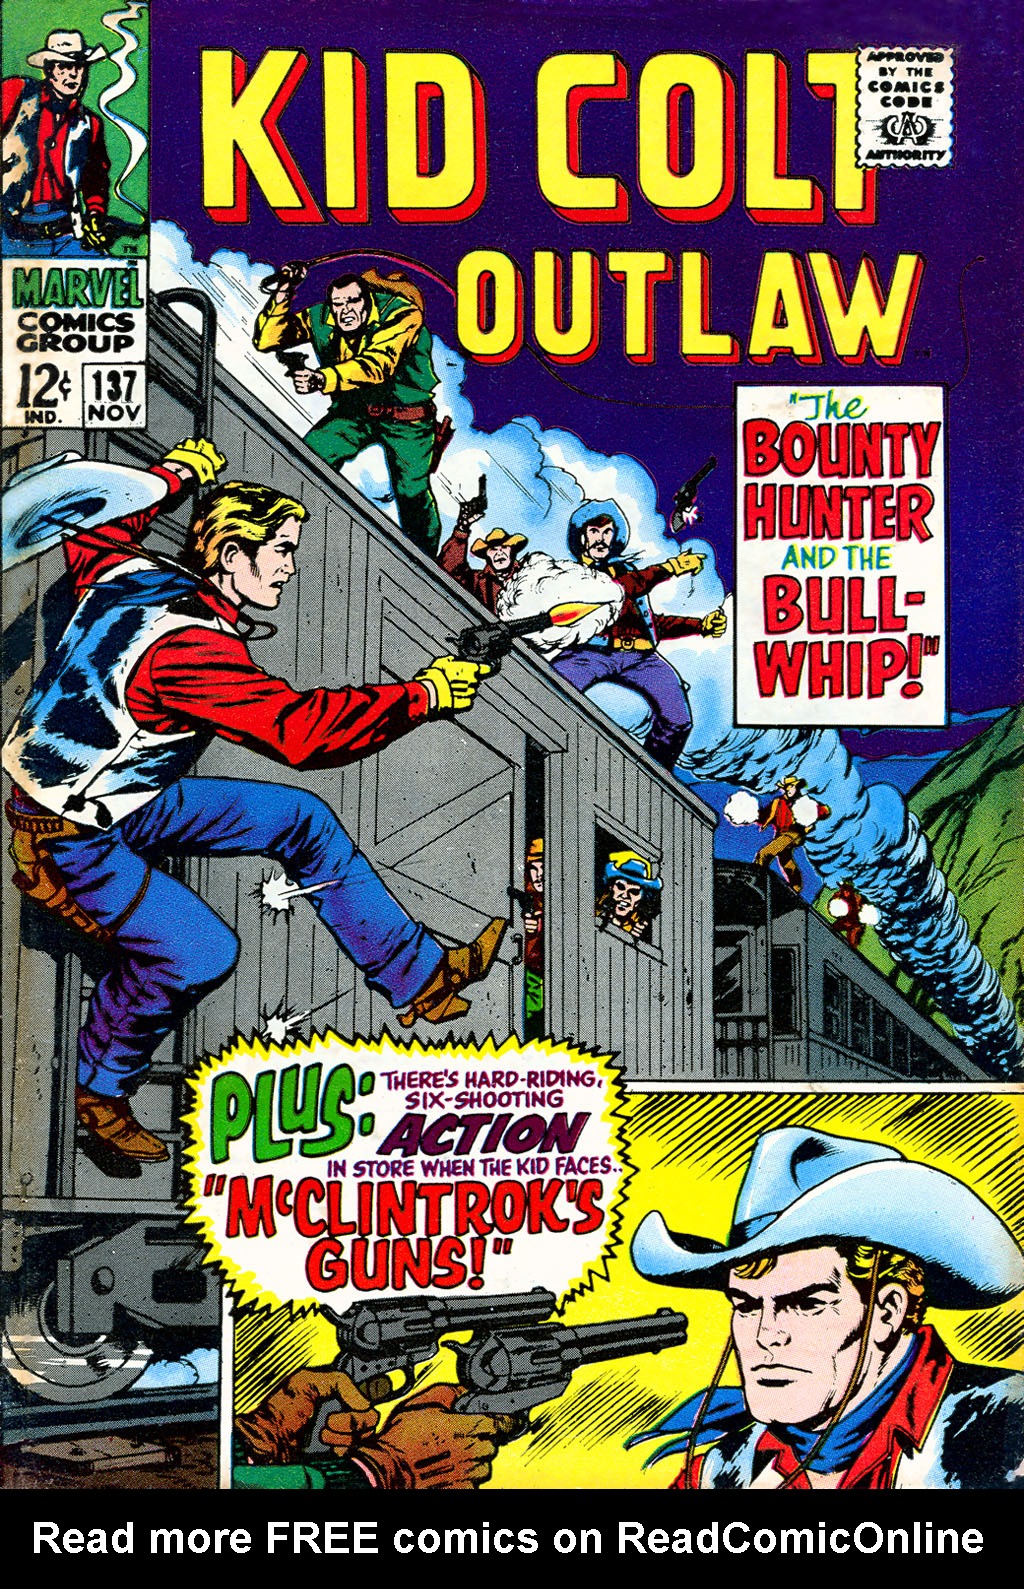 Read online Kid Colt Outlaw comic -  Issue #137 - 1